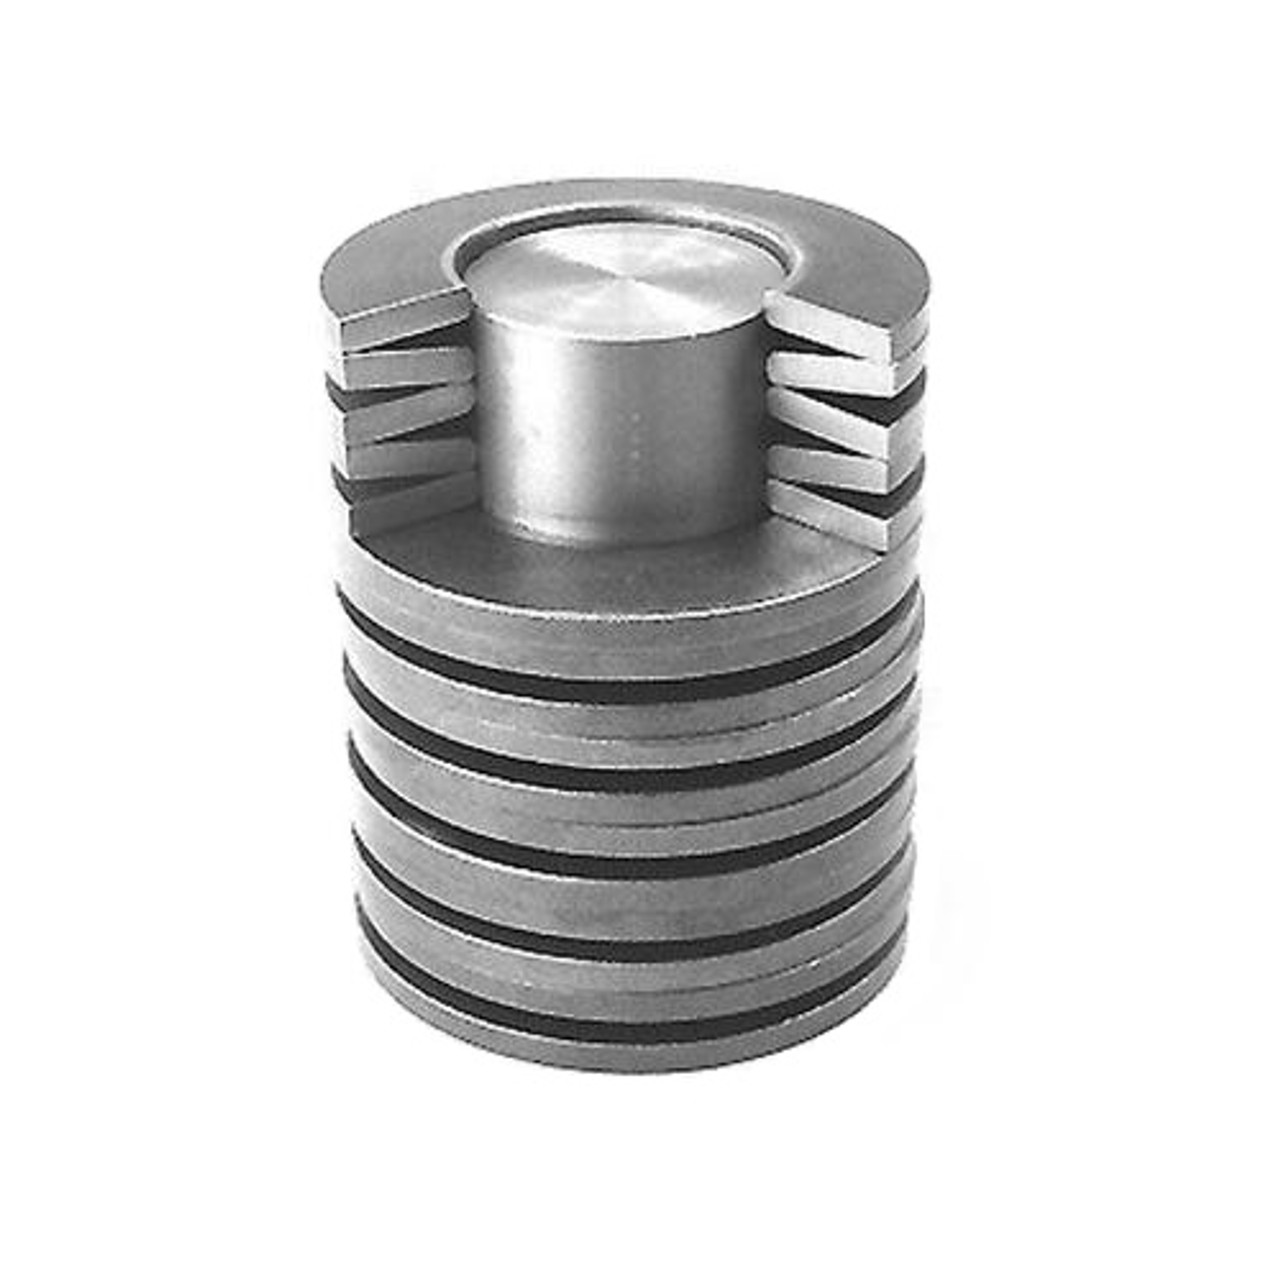 80mm Disc Spring (DIN 2093) Conical Washer  DS082.0-160-09